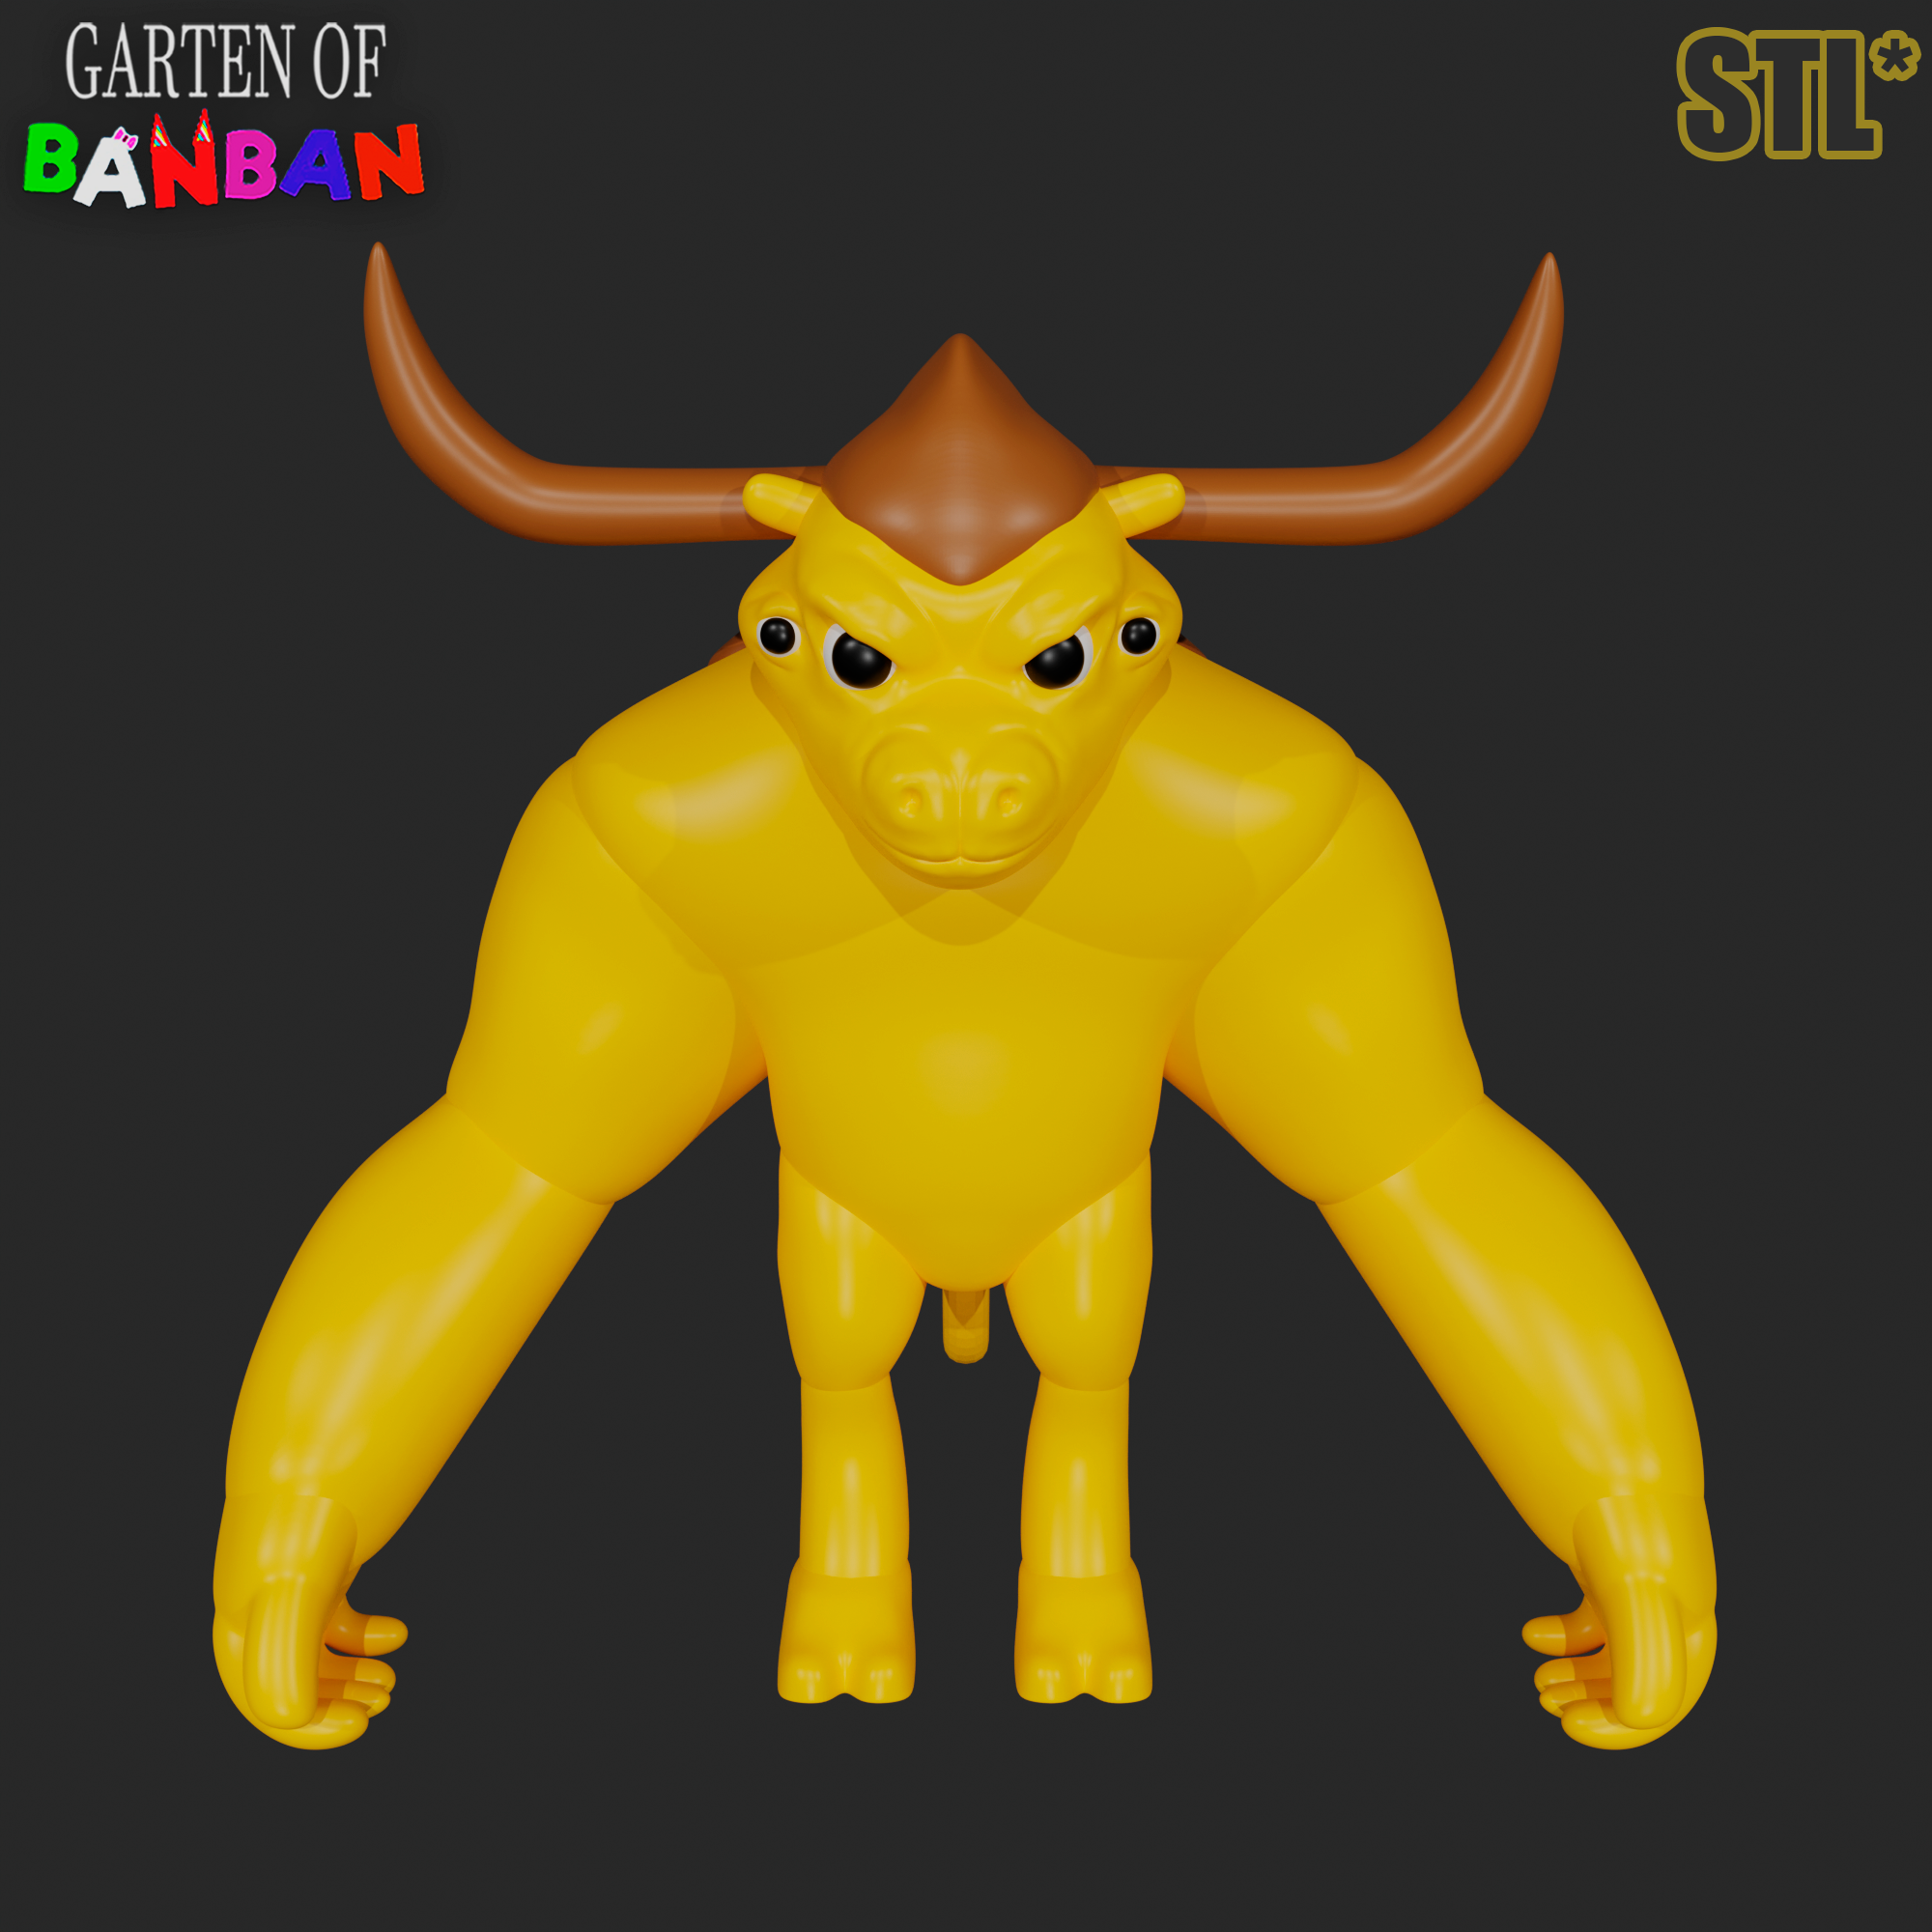 3D printer Monster the Jester from the game Garten of Banban 3